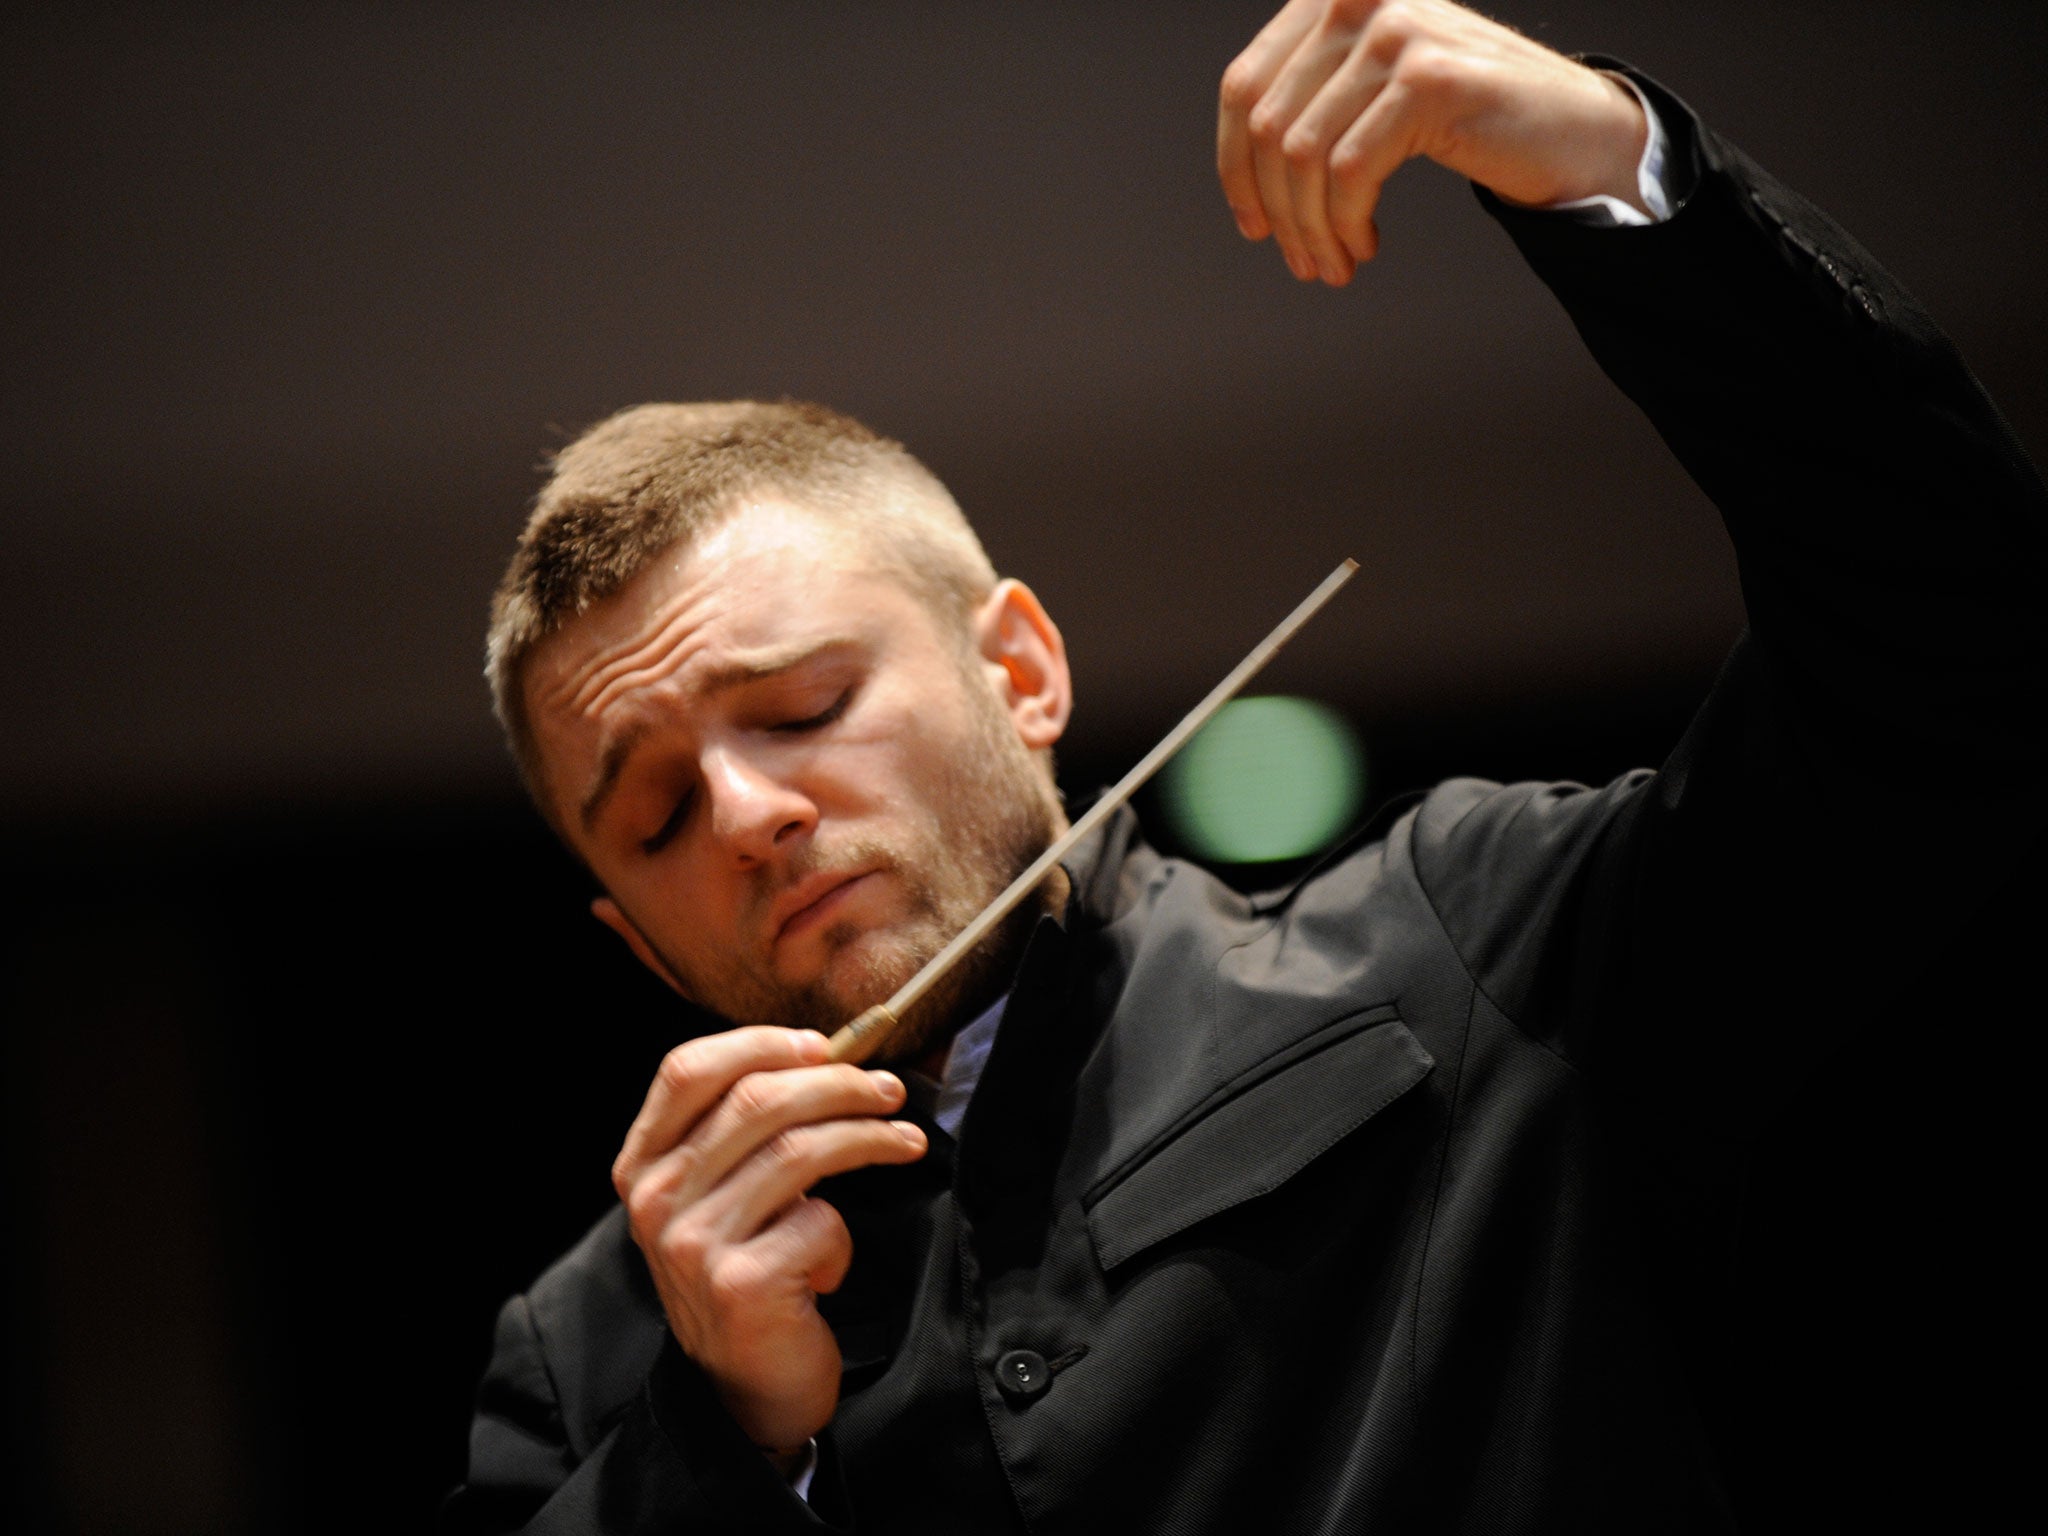 Kirill Karabits, a 37-year-old Ukrainian, is to conduct the I, Culture Orchestra, made up of young musicians from the former Soviet and Eastern Bloc states